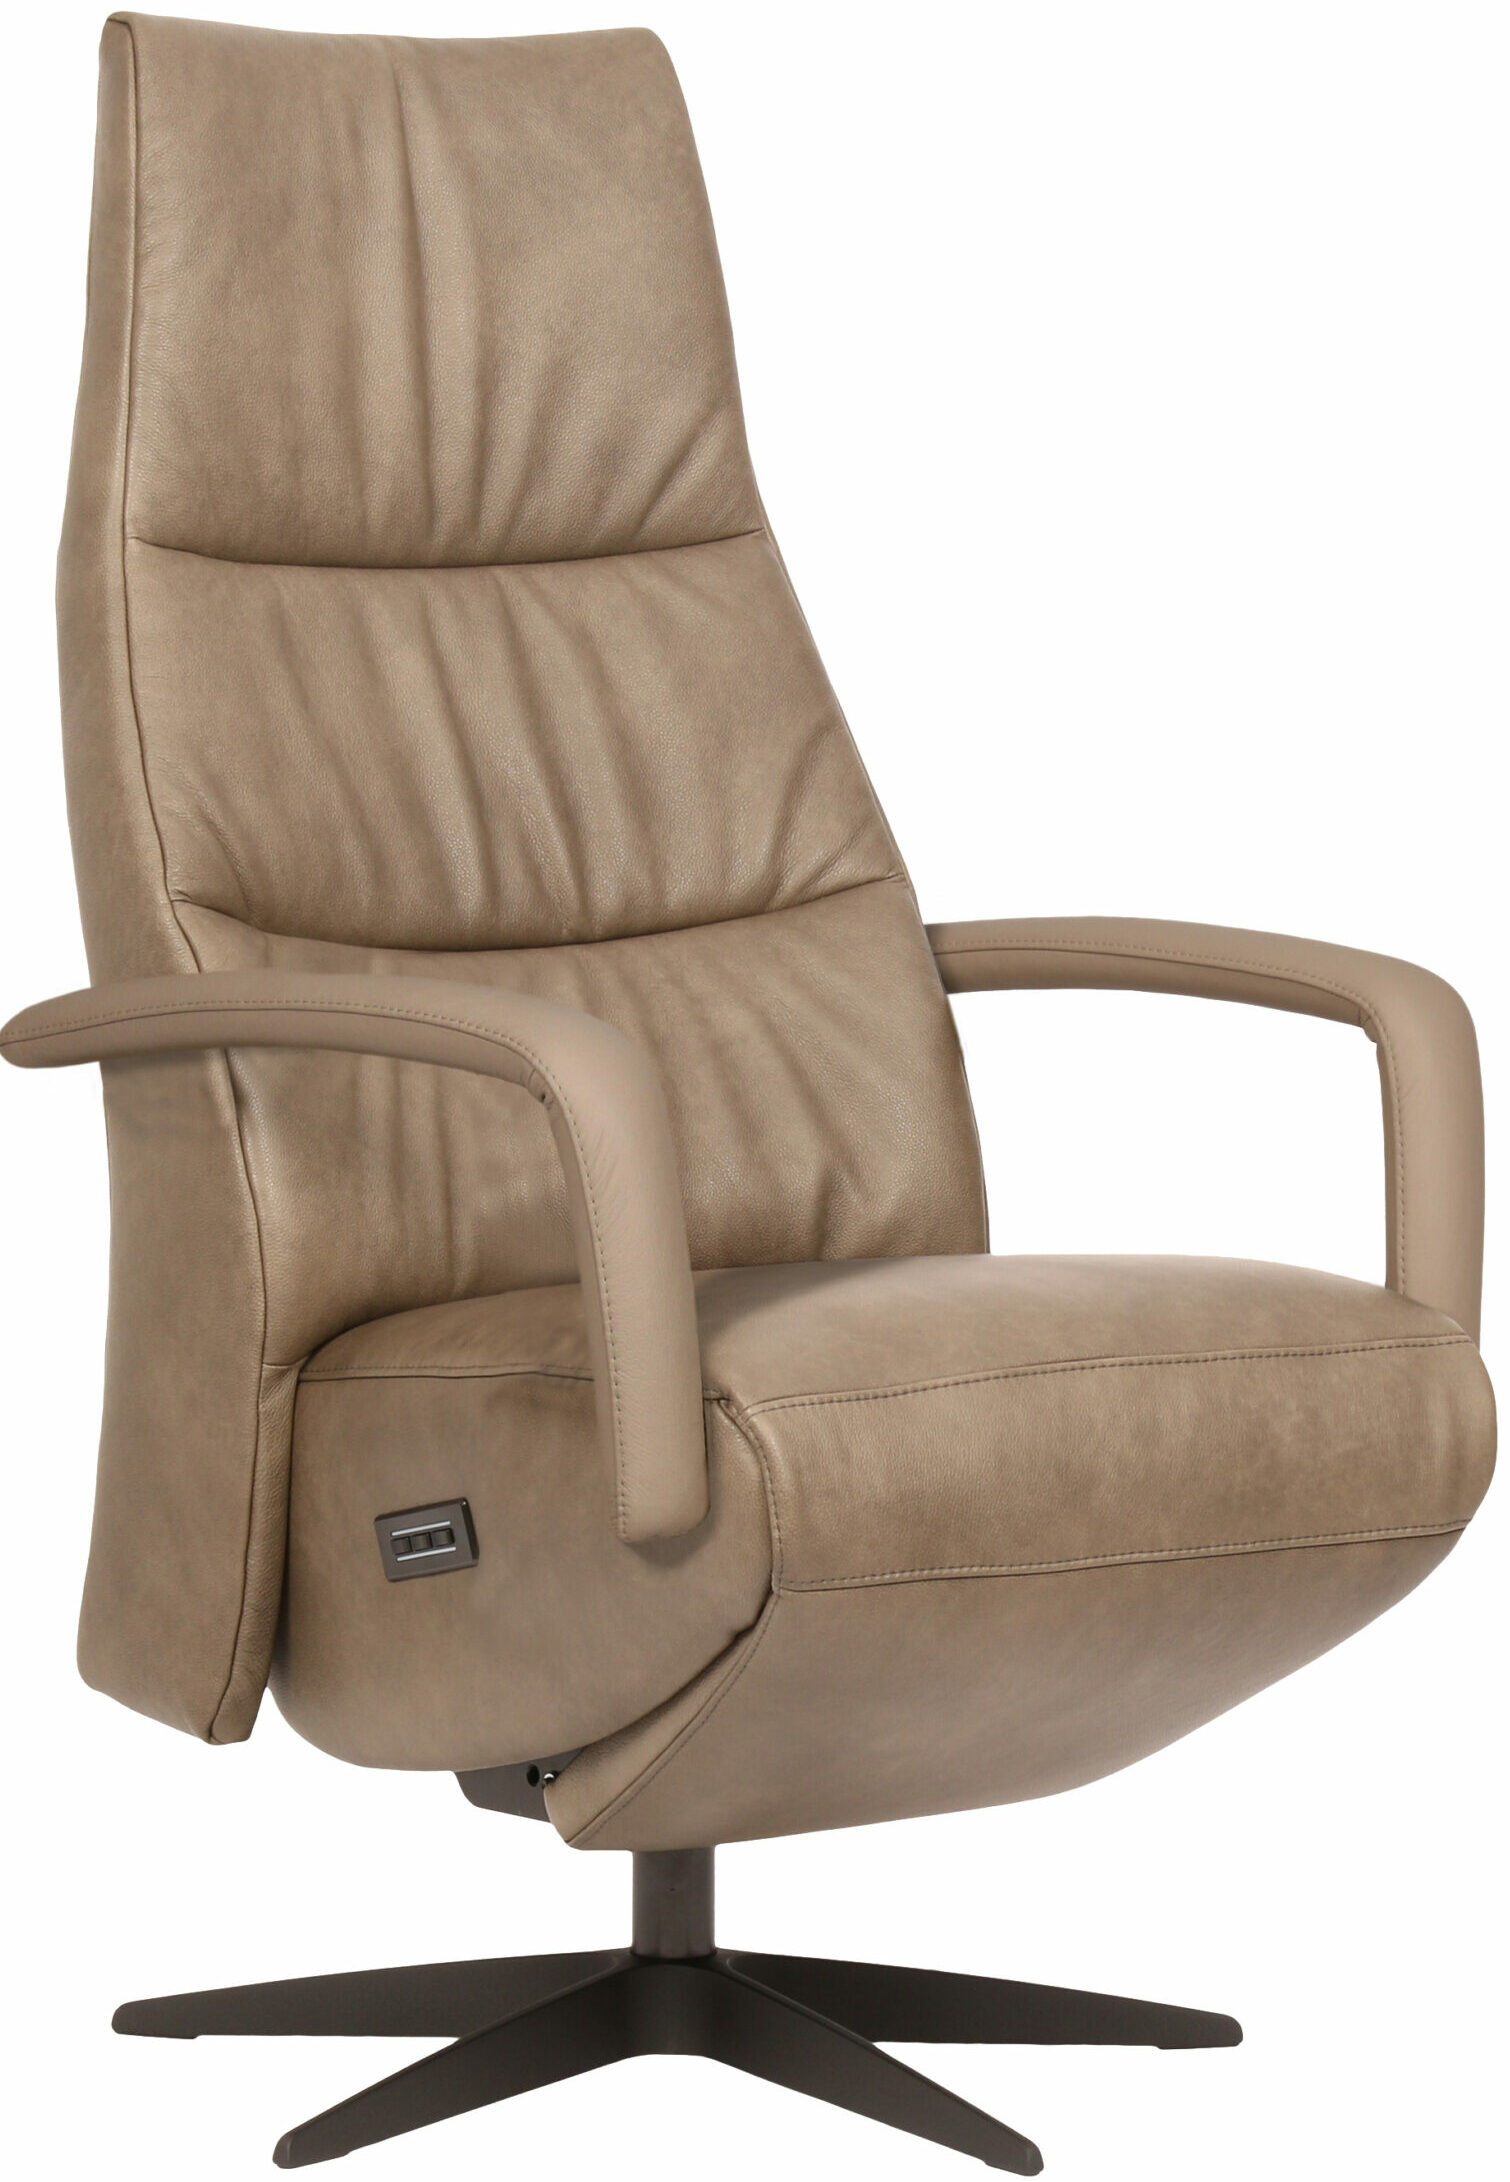 Twinz 652 relaxfauteuil